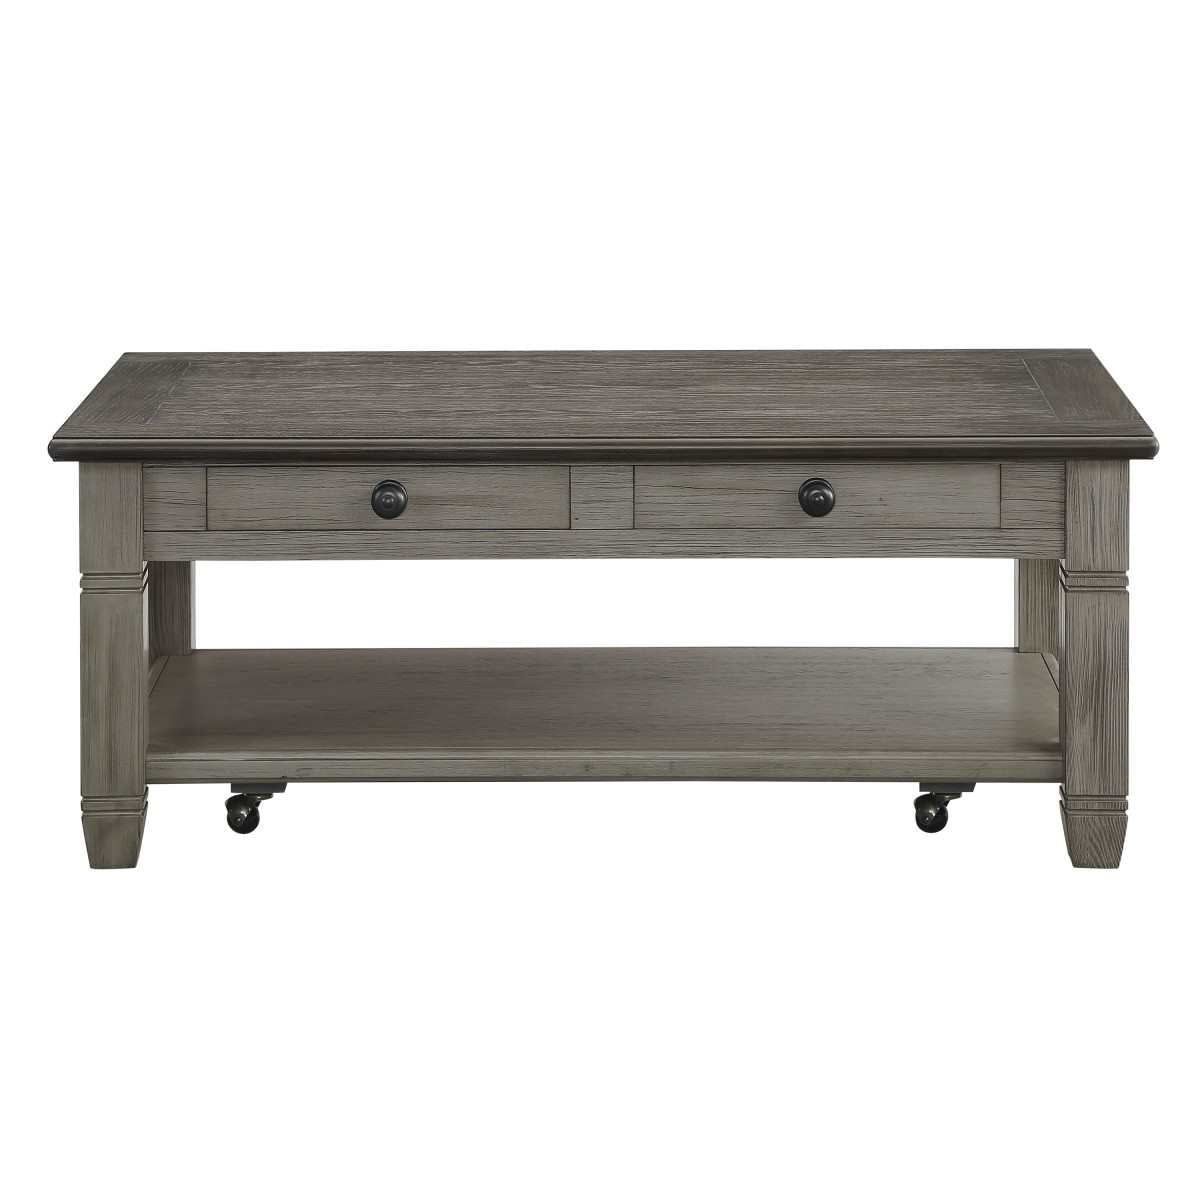 Granby Coffee Table Collection 5627GY-30